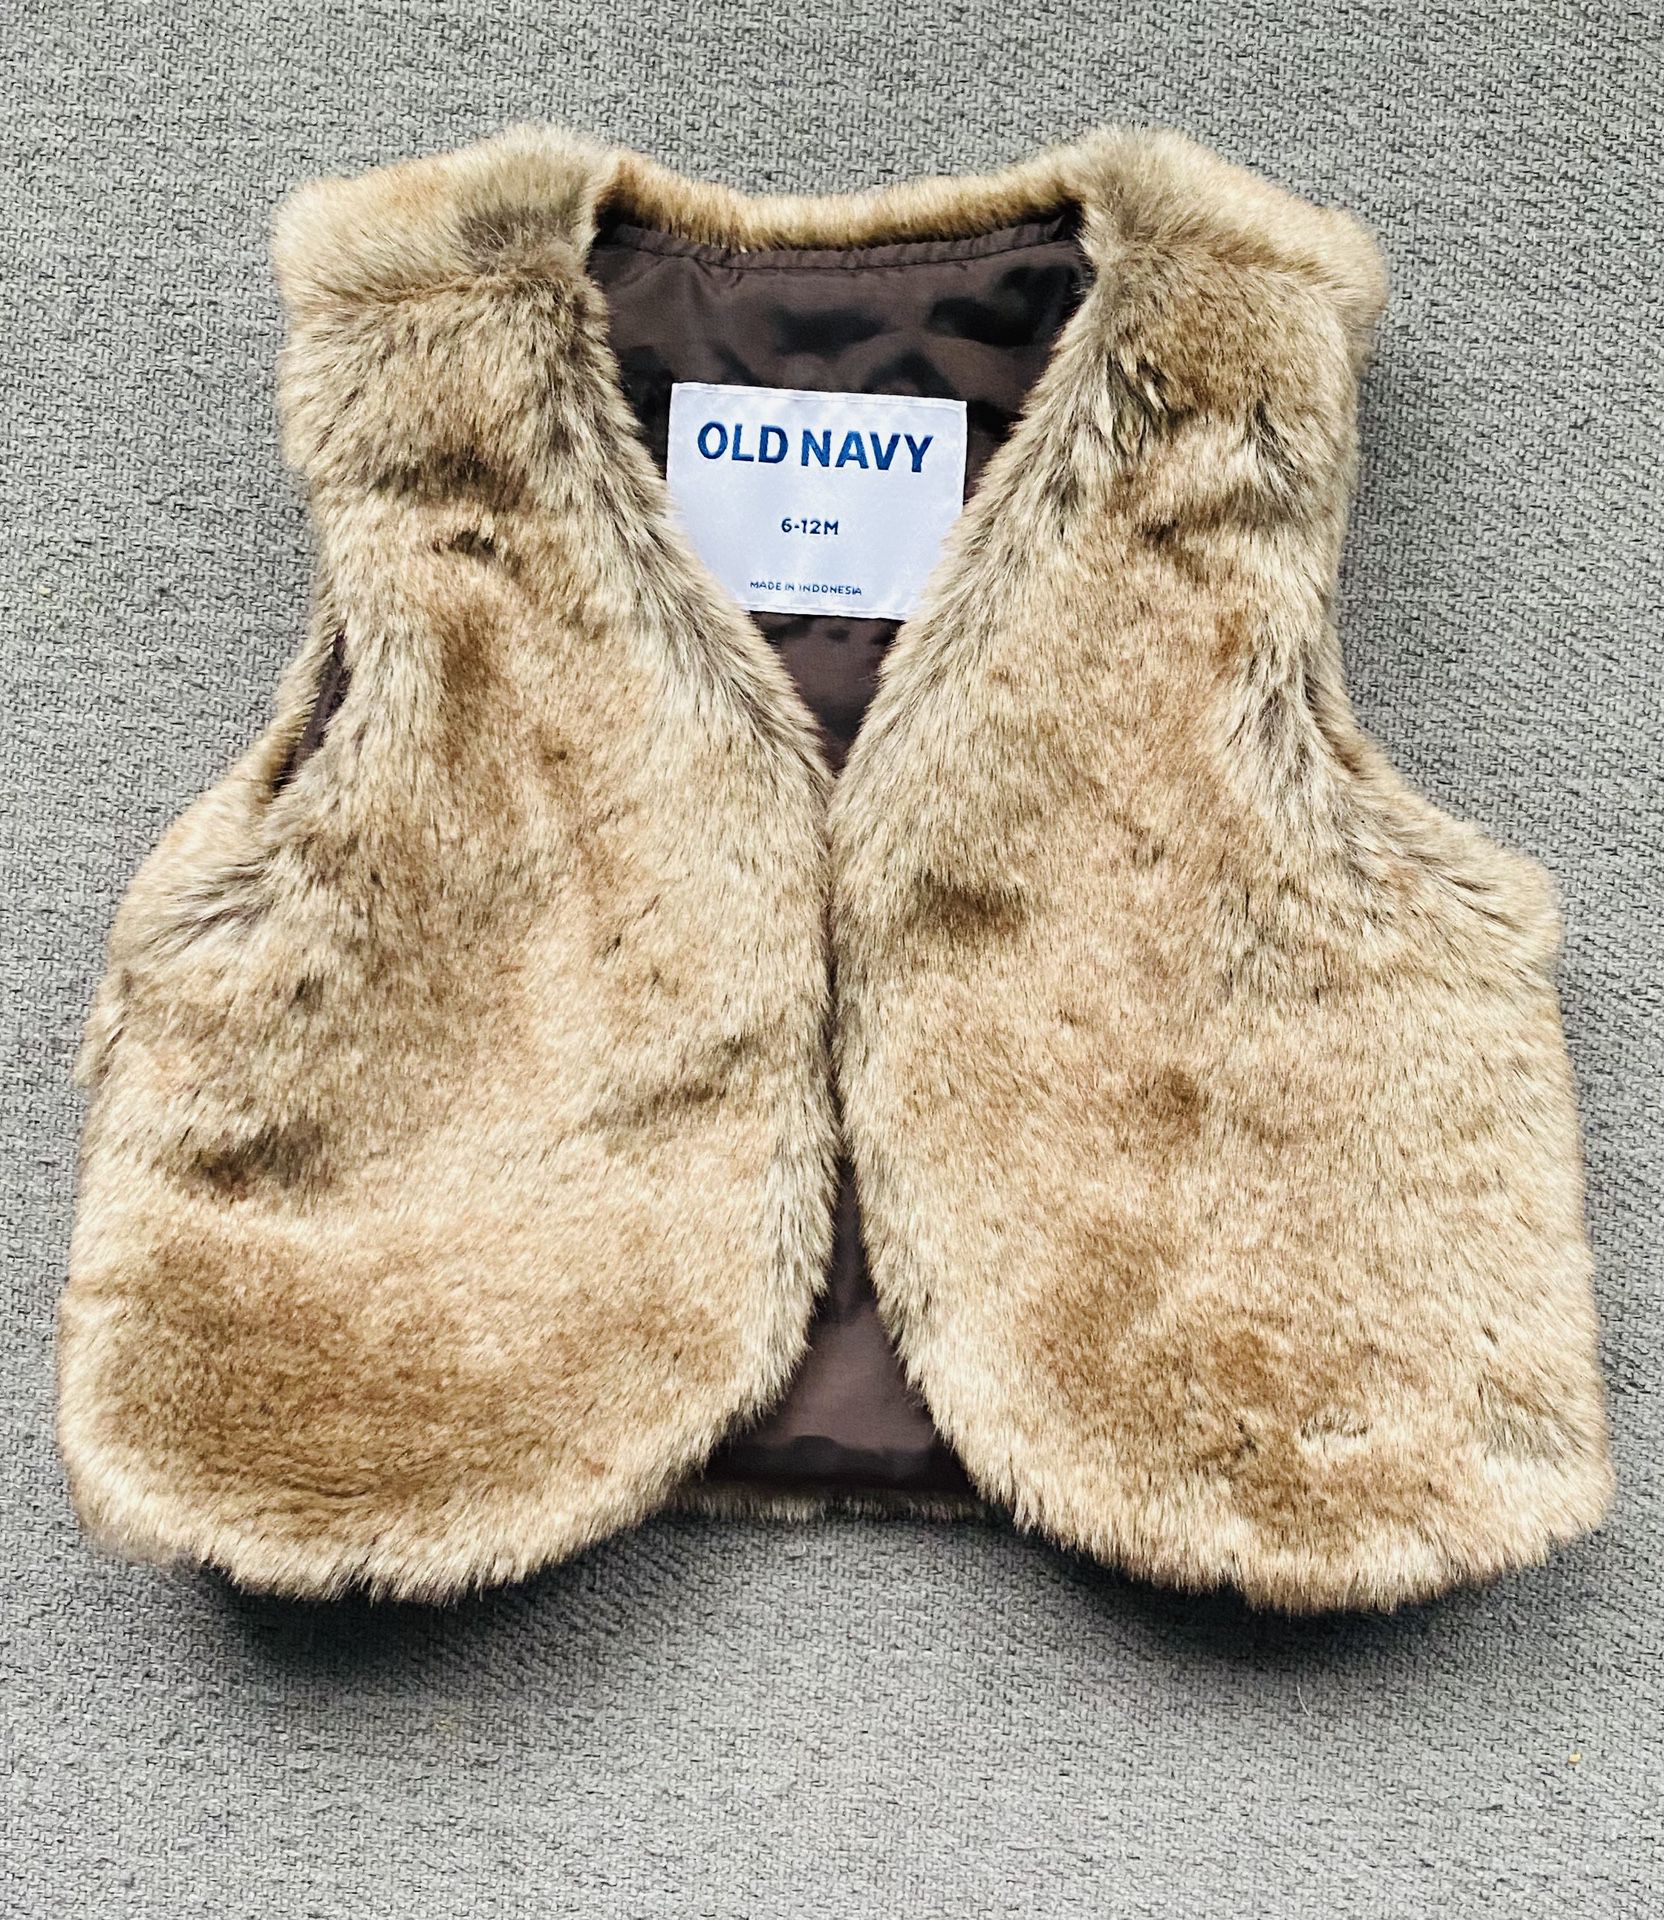 Old Navy Fur Jacket For Baby Girl. 